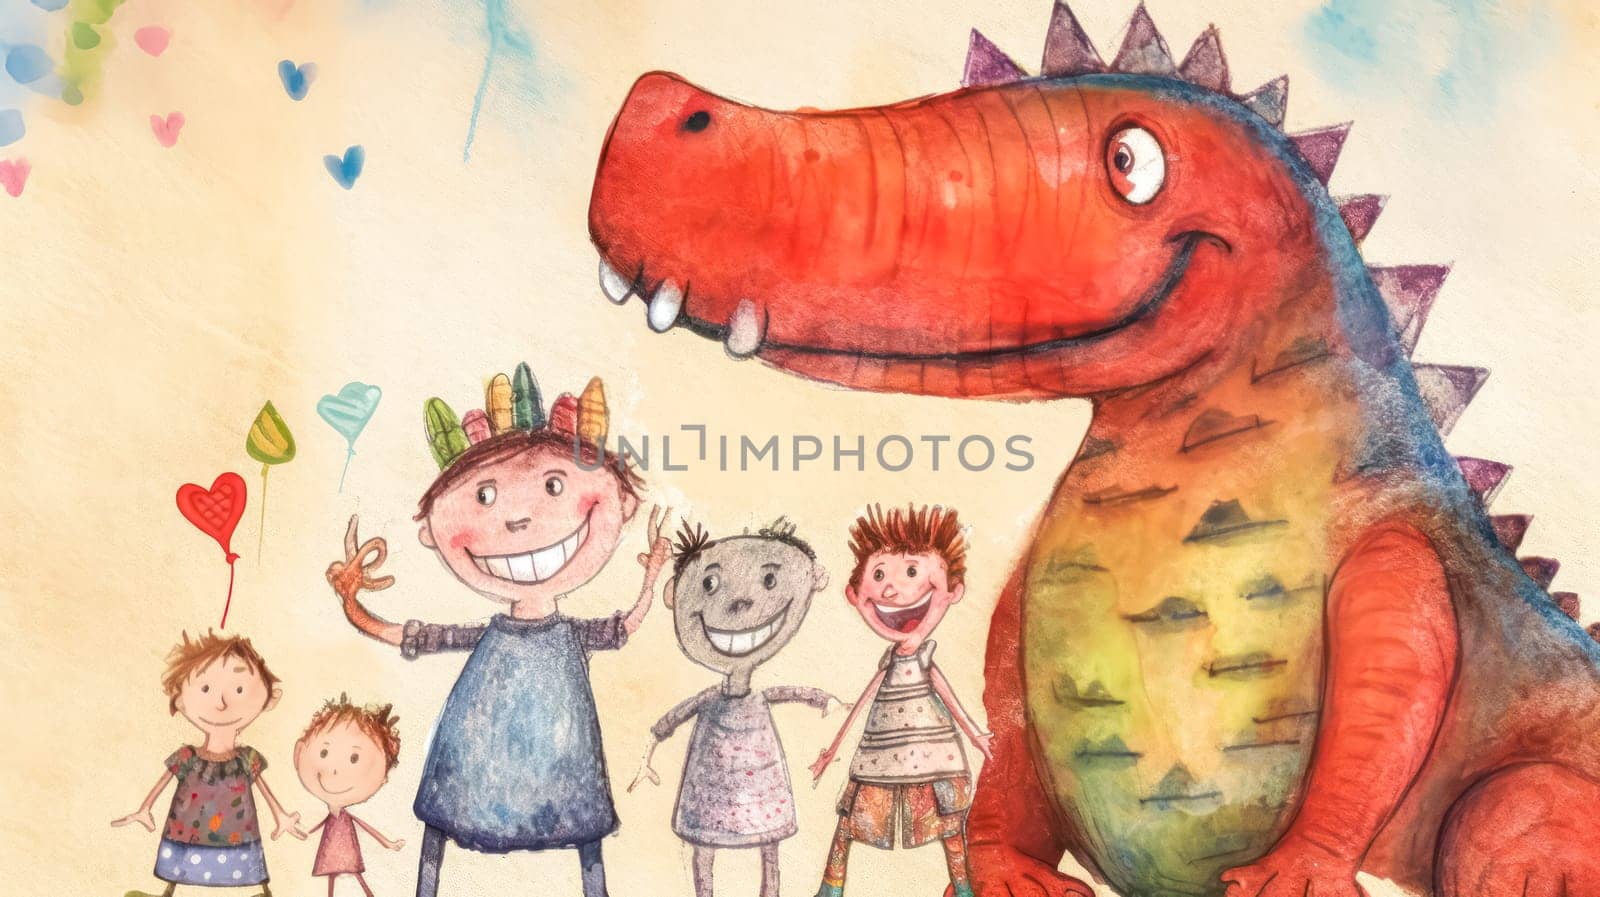 A delightful childrens pencil drawing depicts playful dinosaurs and kids having a blast together, igniting imagination and wonder in a whimsical storybook scene.